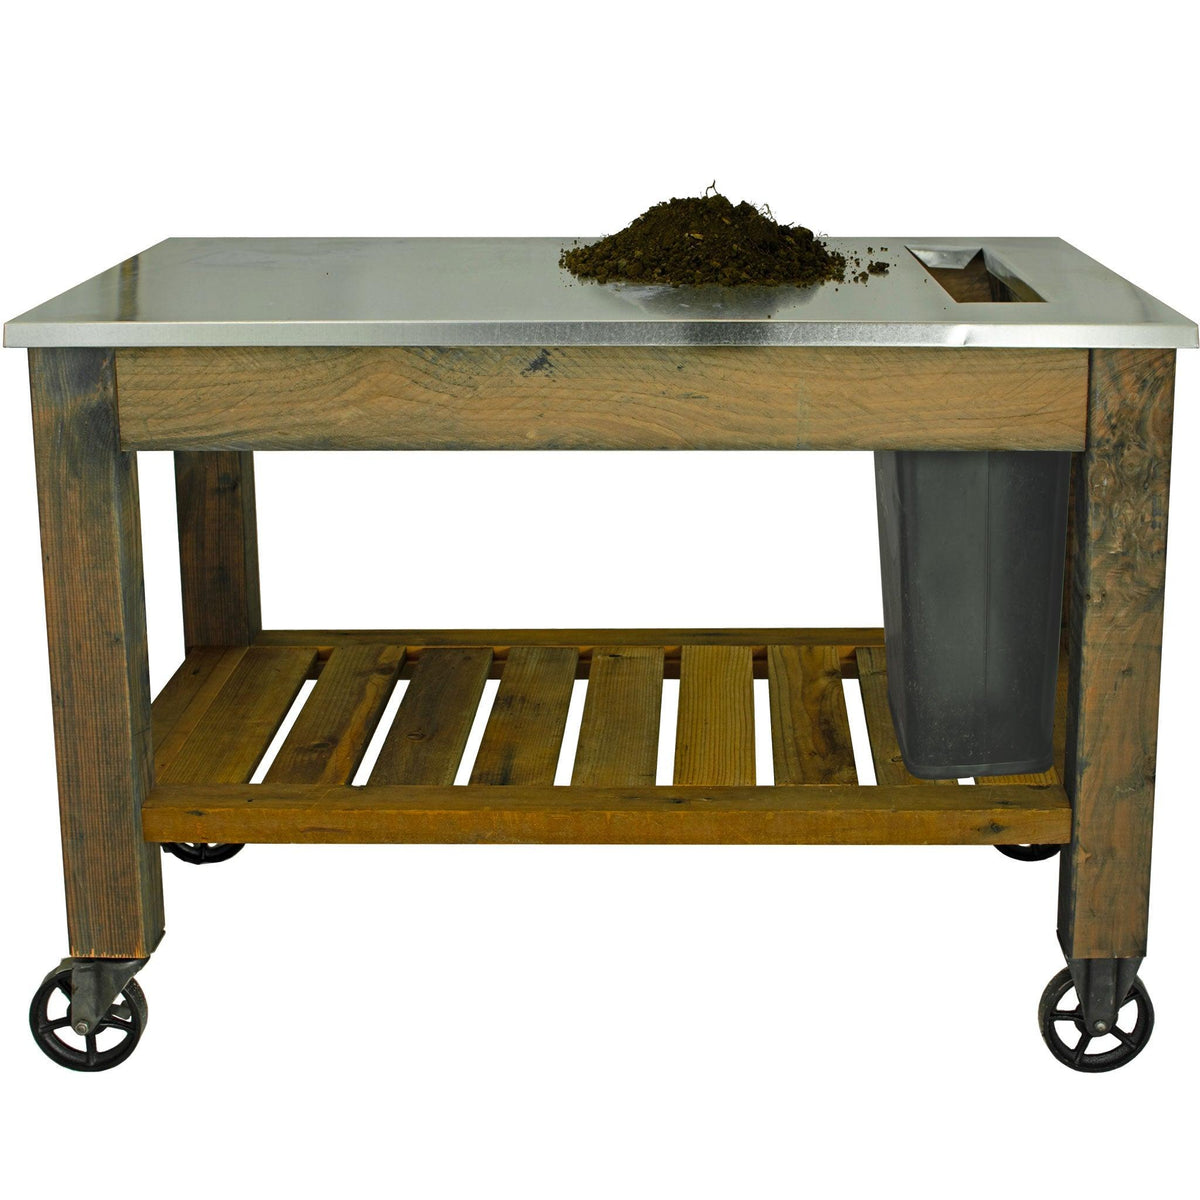 Gardener's Pro Potting Table now comes with a waste disposal hole conveniently located on the side of the table